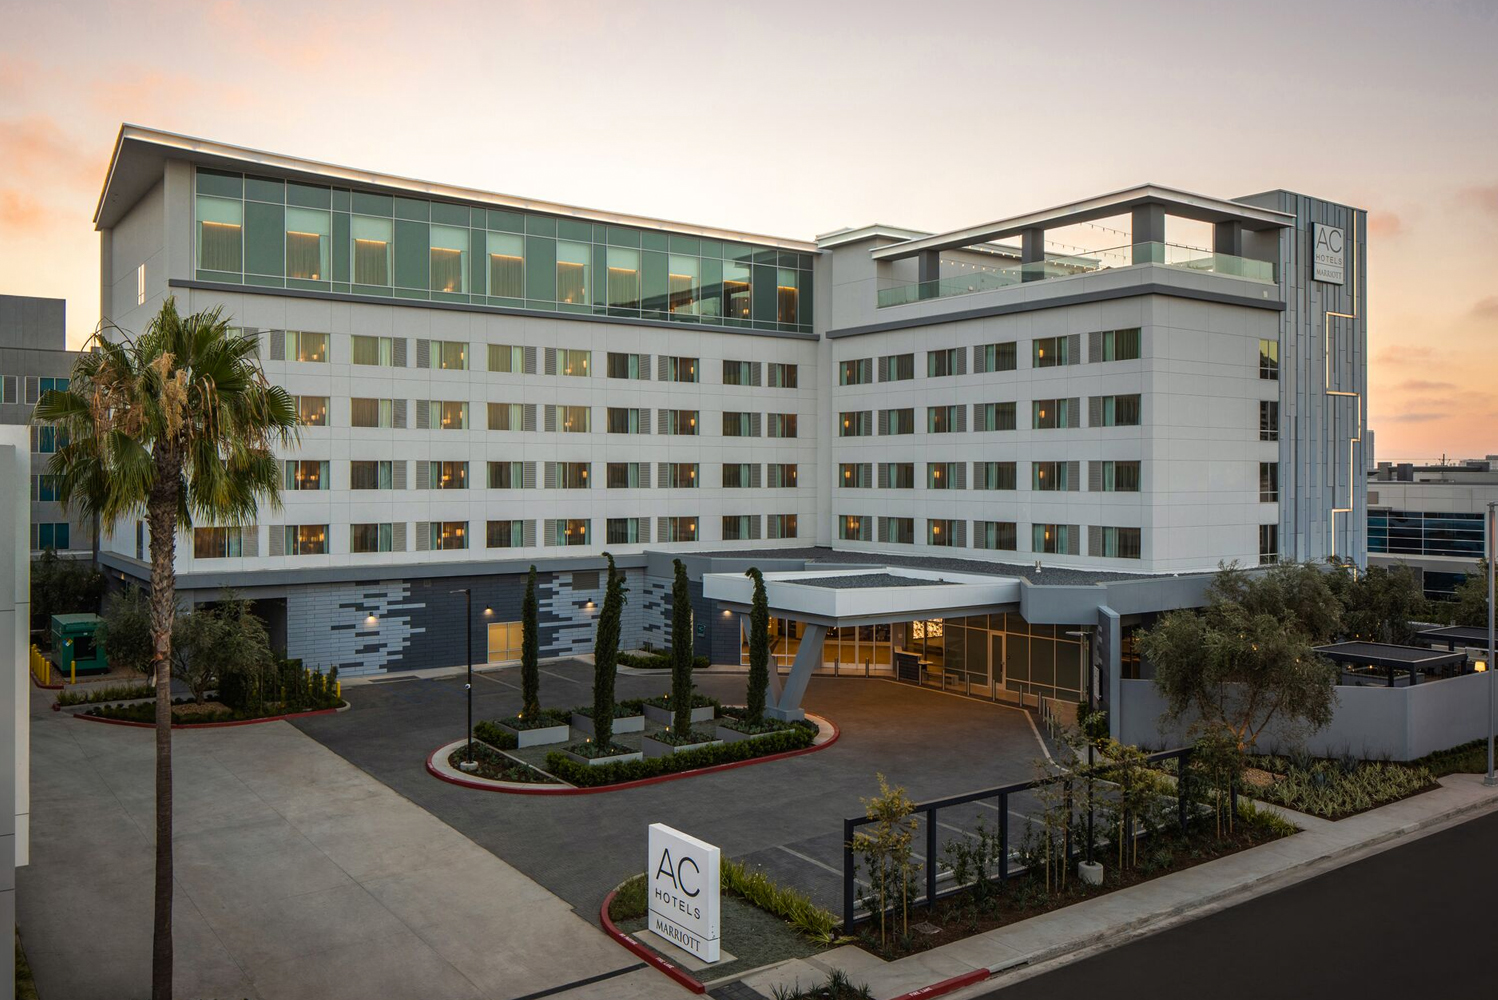 The 180-room AC Hotel Los Angeles South Bay has opened 